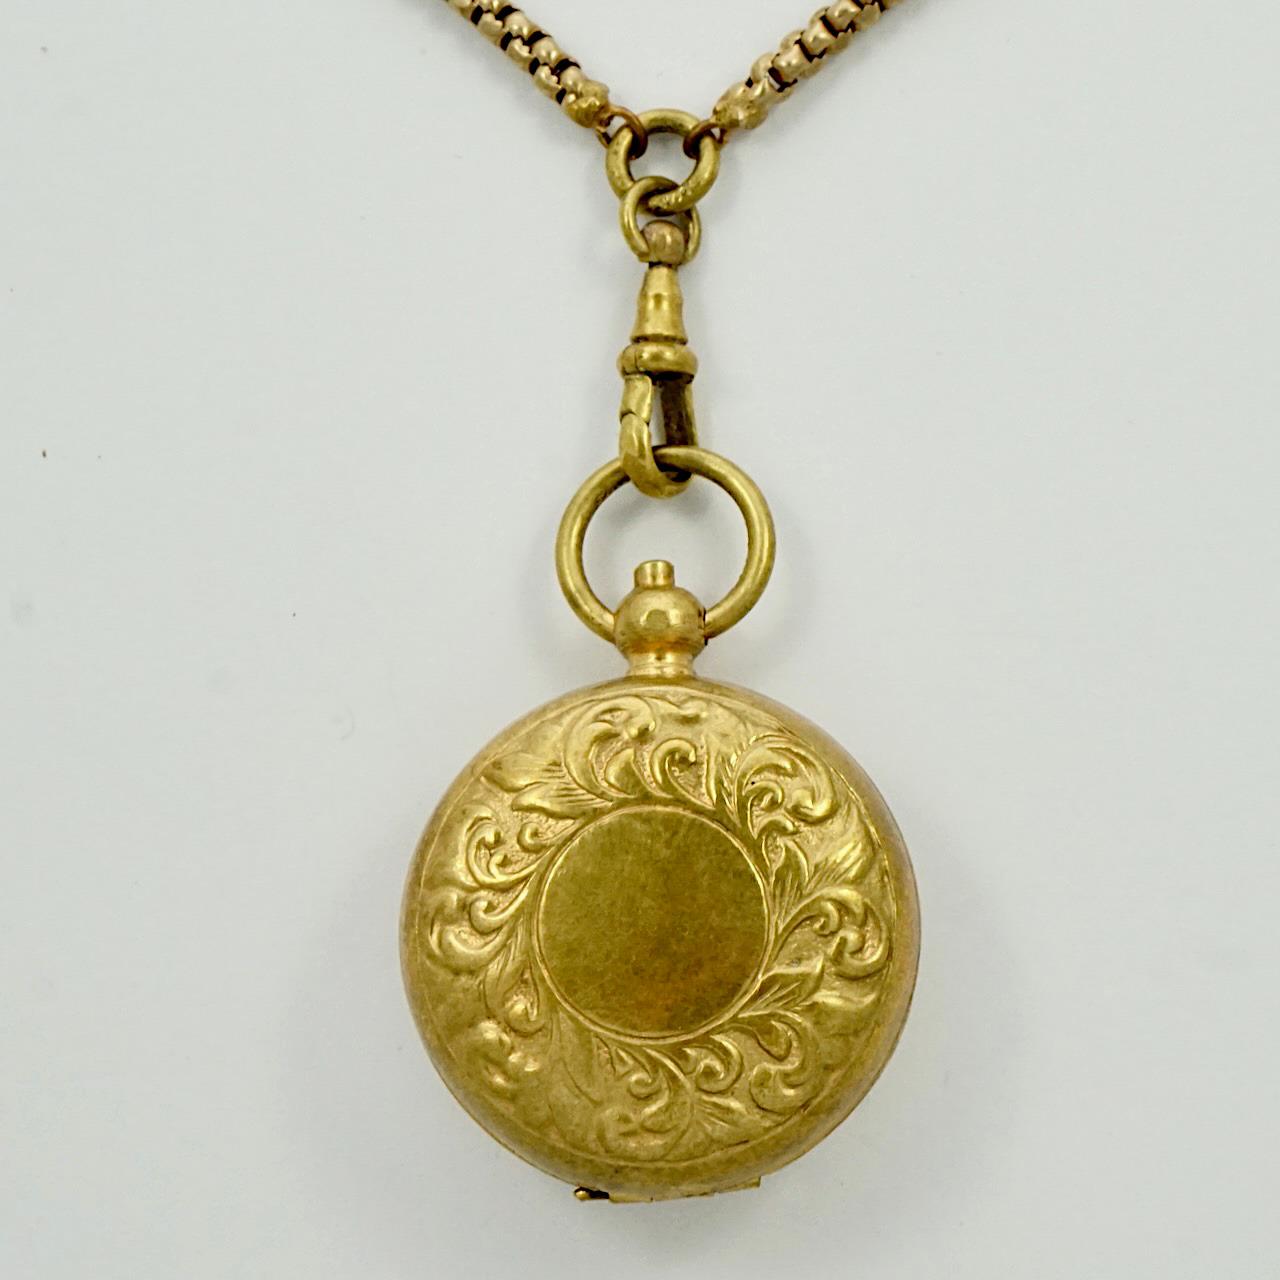 Antique gold gilt metal long guard chain with dog clip, and featuring an attached brass sovereign coin holder pendant. The dog clip would have originally been used to hold a pocket watch. The coin holder has decoration to the front and opens by